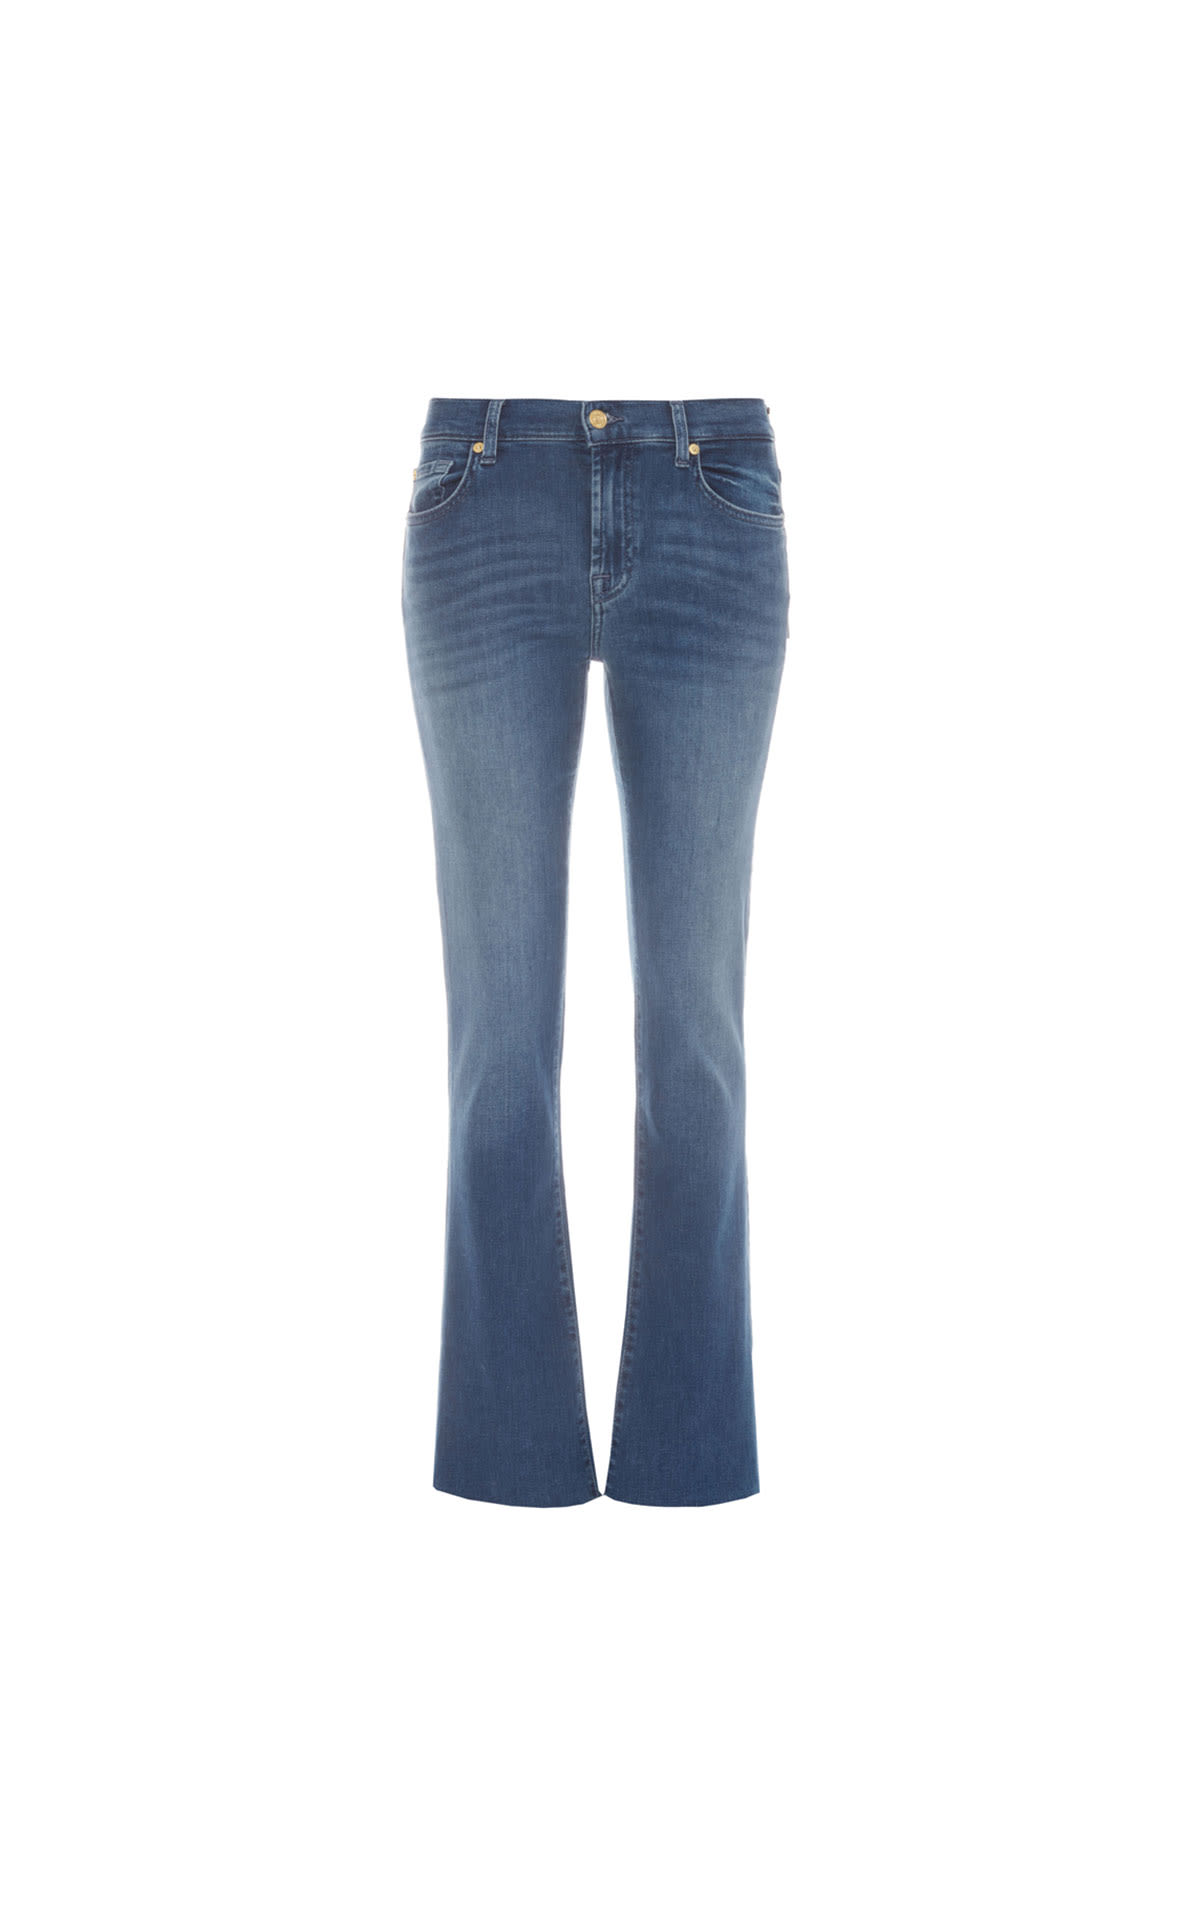 7 For all Mankind Bootcut jeans from Bicester Village